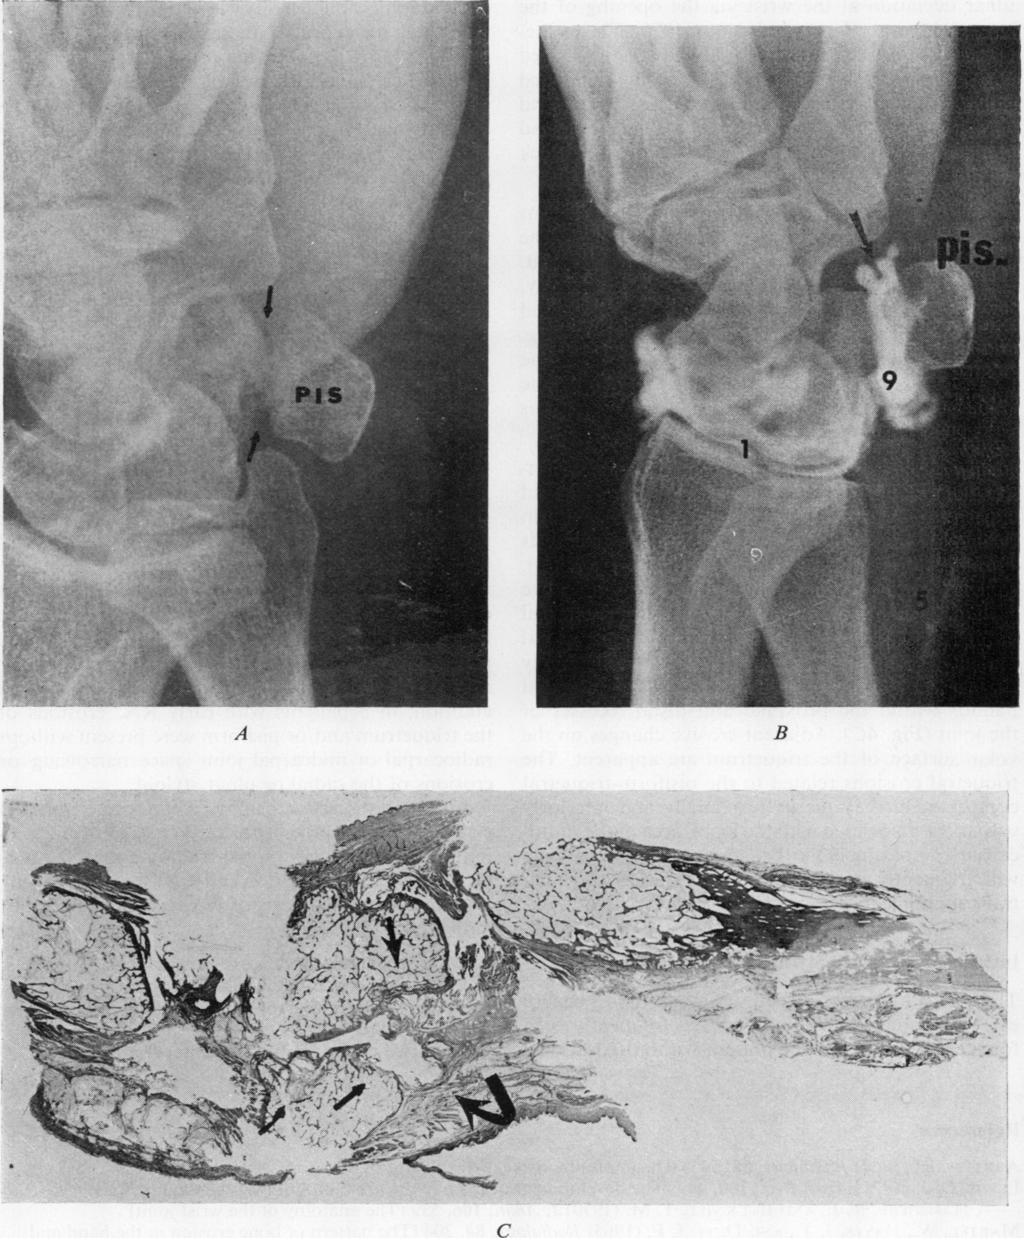 A Pisiform and triquetrum in rheumatoid arthritis 49 B Ann Rheum Dis: first published as 10.1136/ard.35.1.46 on 1 February 1976. Downloaded from http://ard.bmj.com/ C FIG.